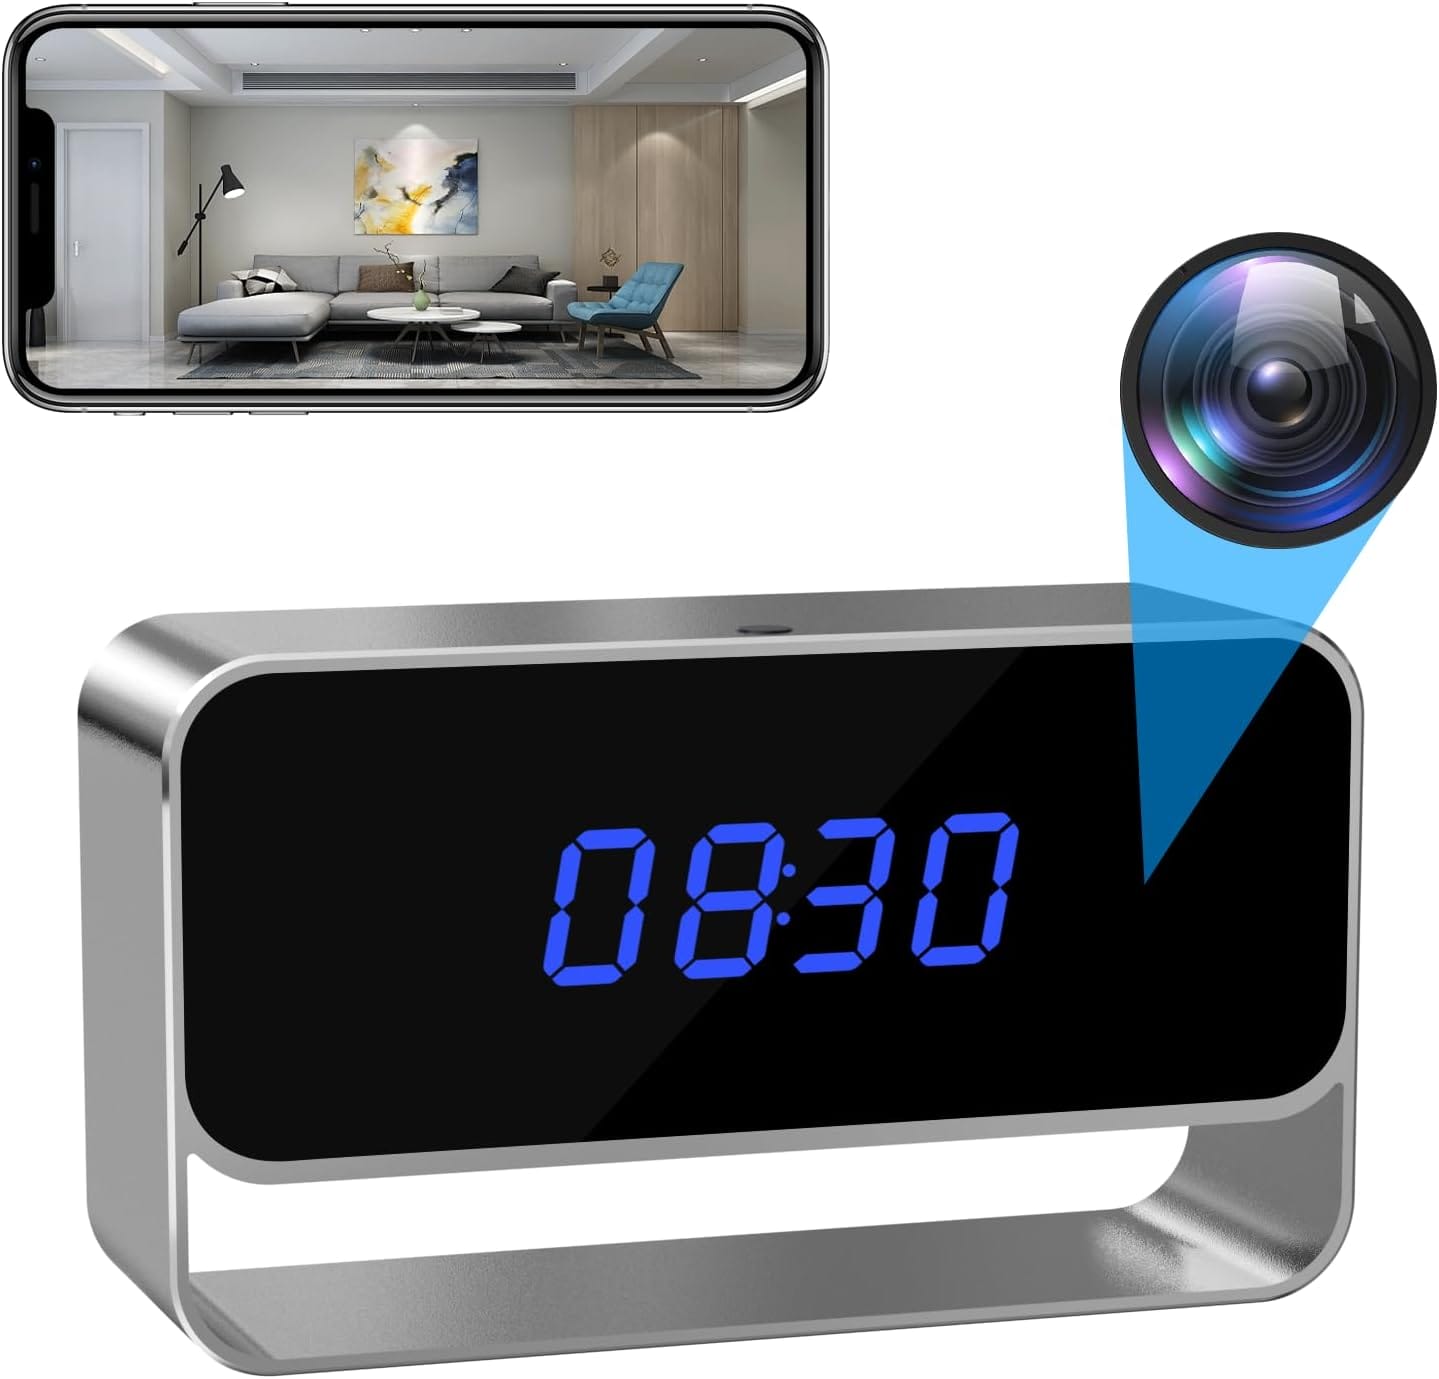 Hidden Camera Clock FHD 1080P WiFi Spy Camera Mini Wireless Nanny Cam Indoor Home Office Security Night Vision Motion Detection